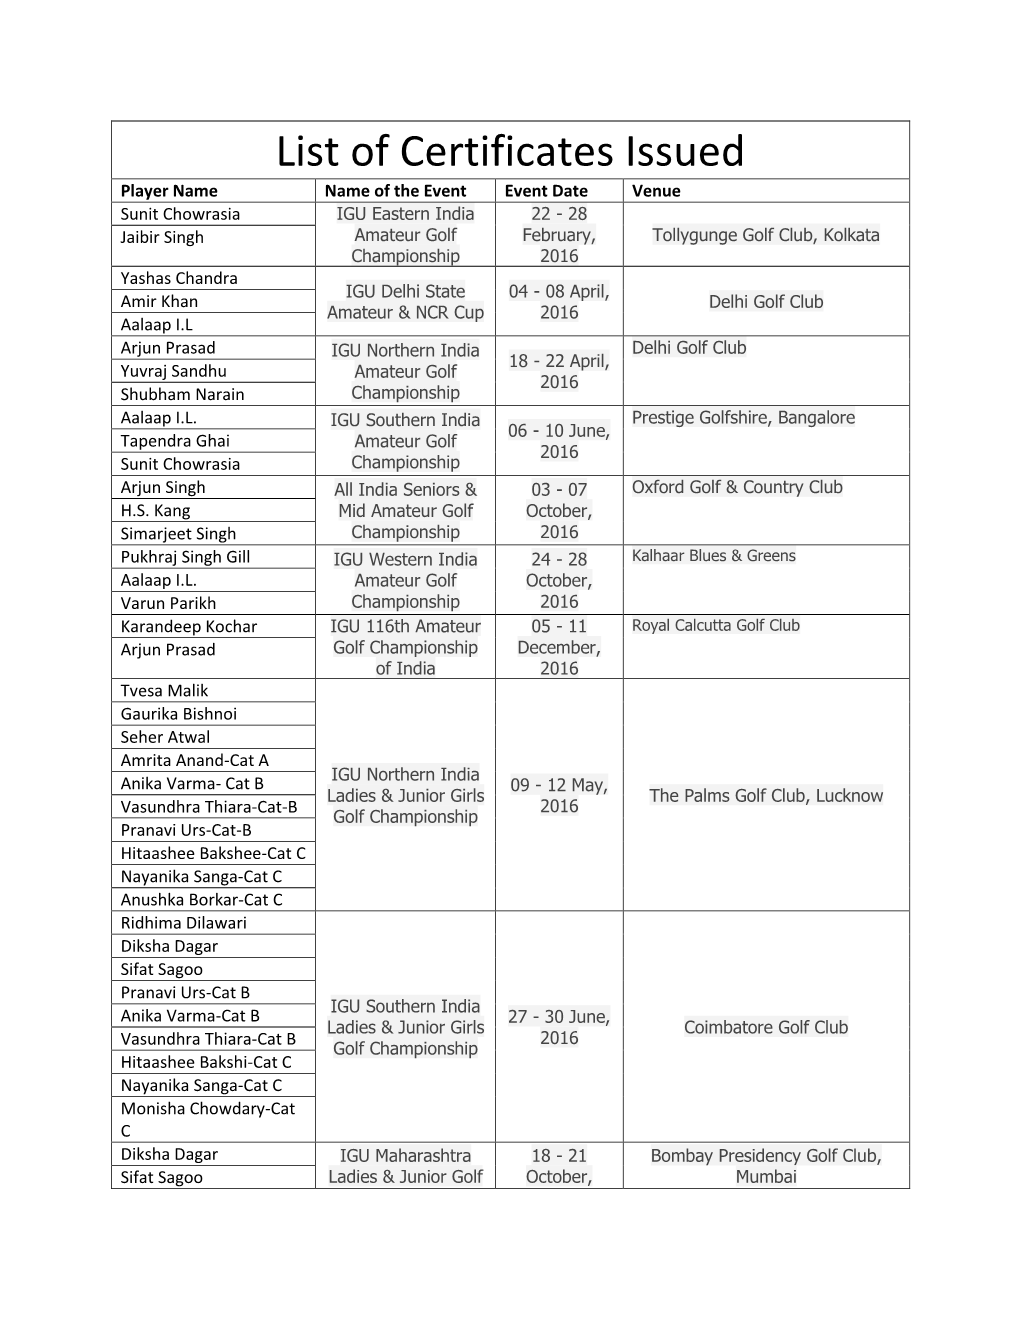 List of Certificates Issued